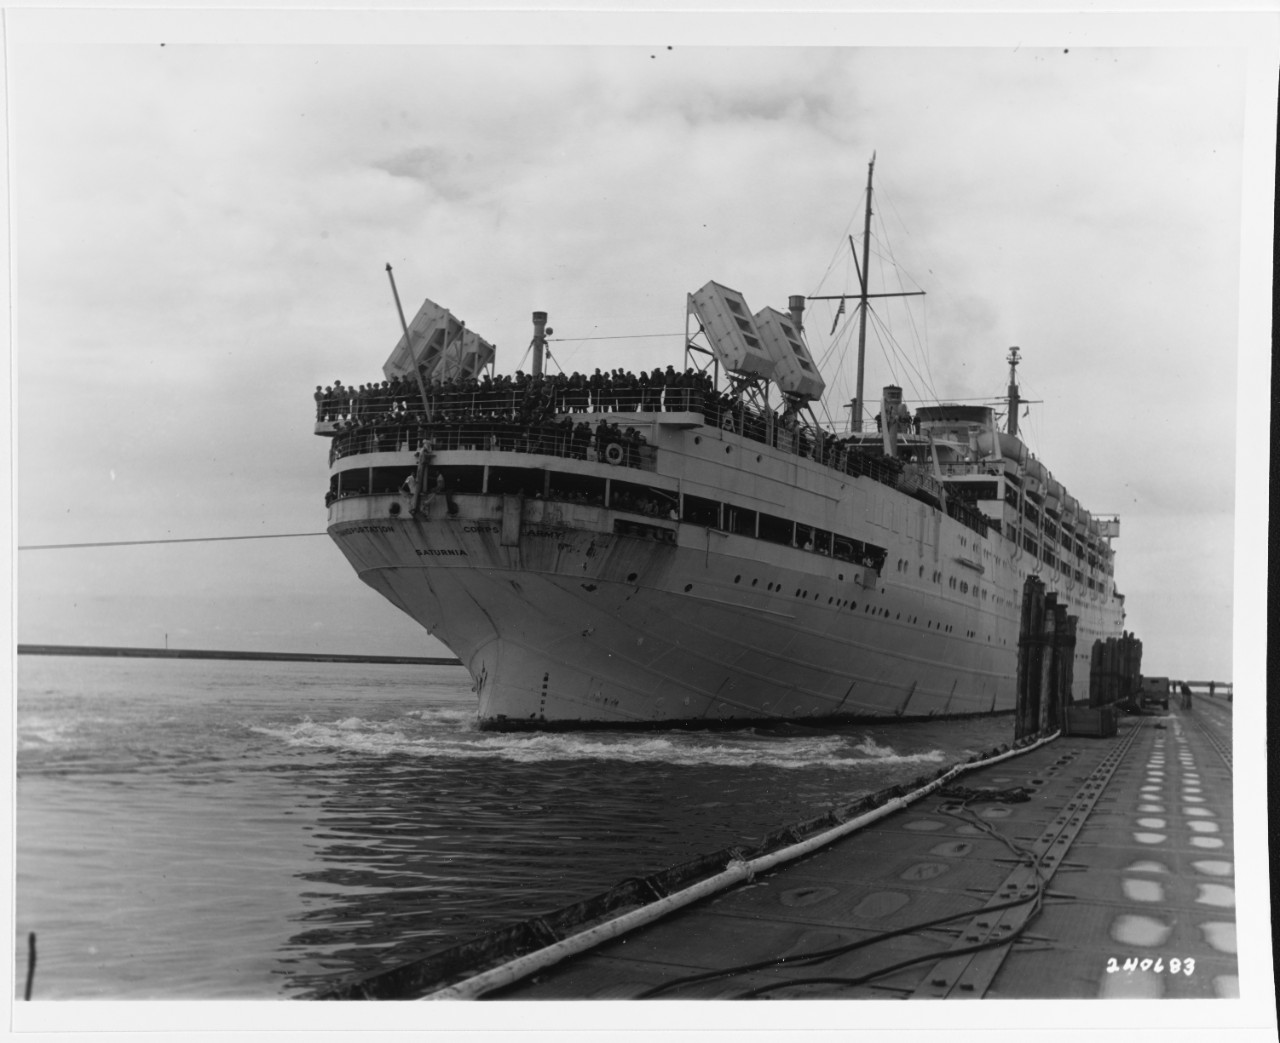 U.S.A.T. SATURNIA (ex-Italian liner SATURNIA) Arrives at Le Havre, France, from the U.S.A., May 19, 1946